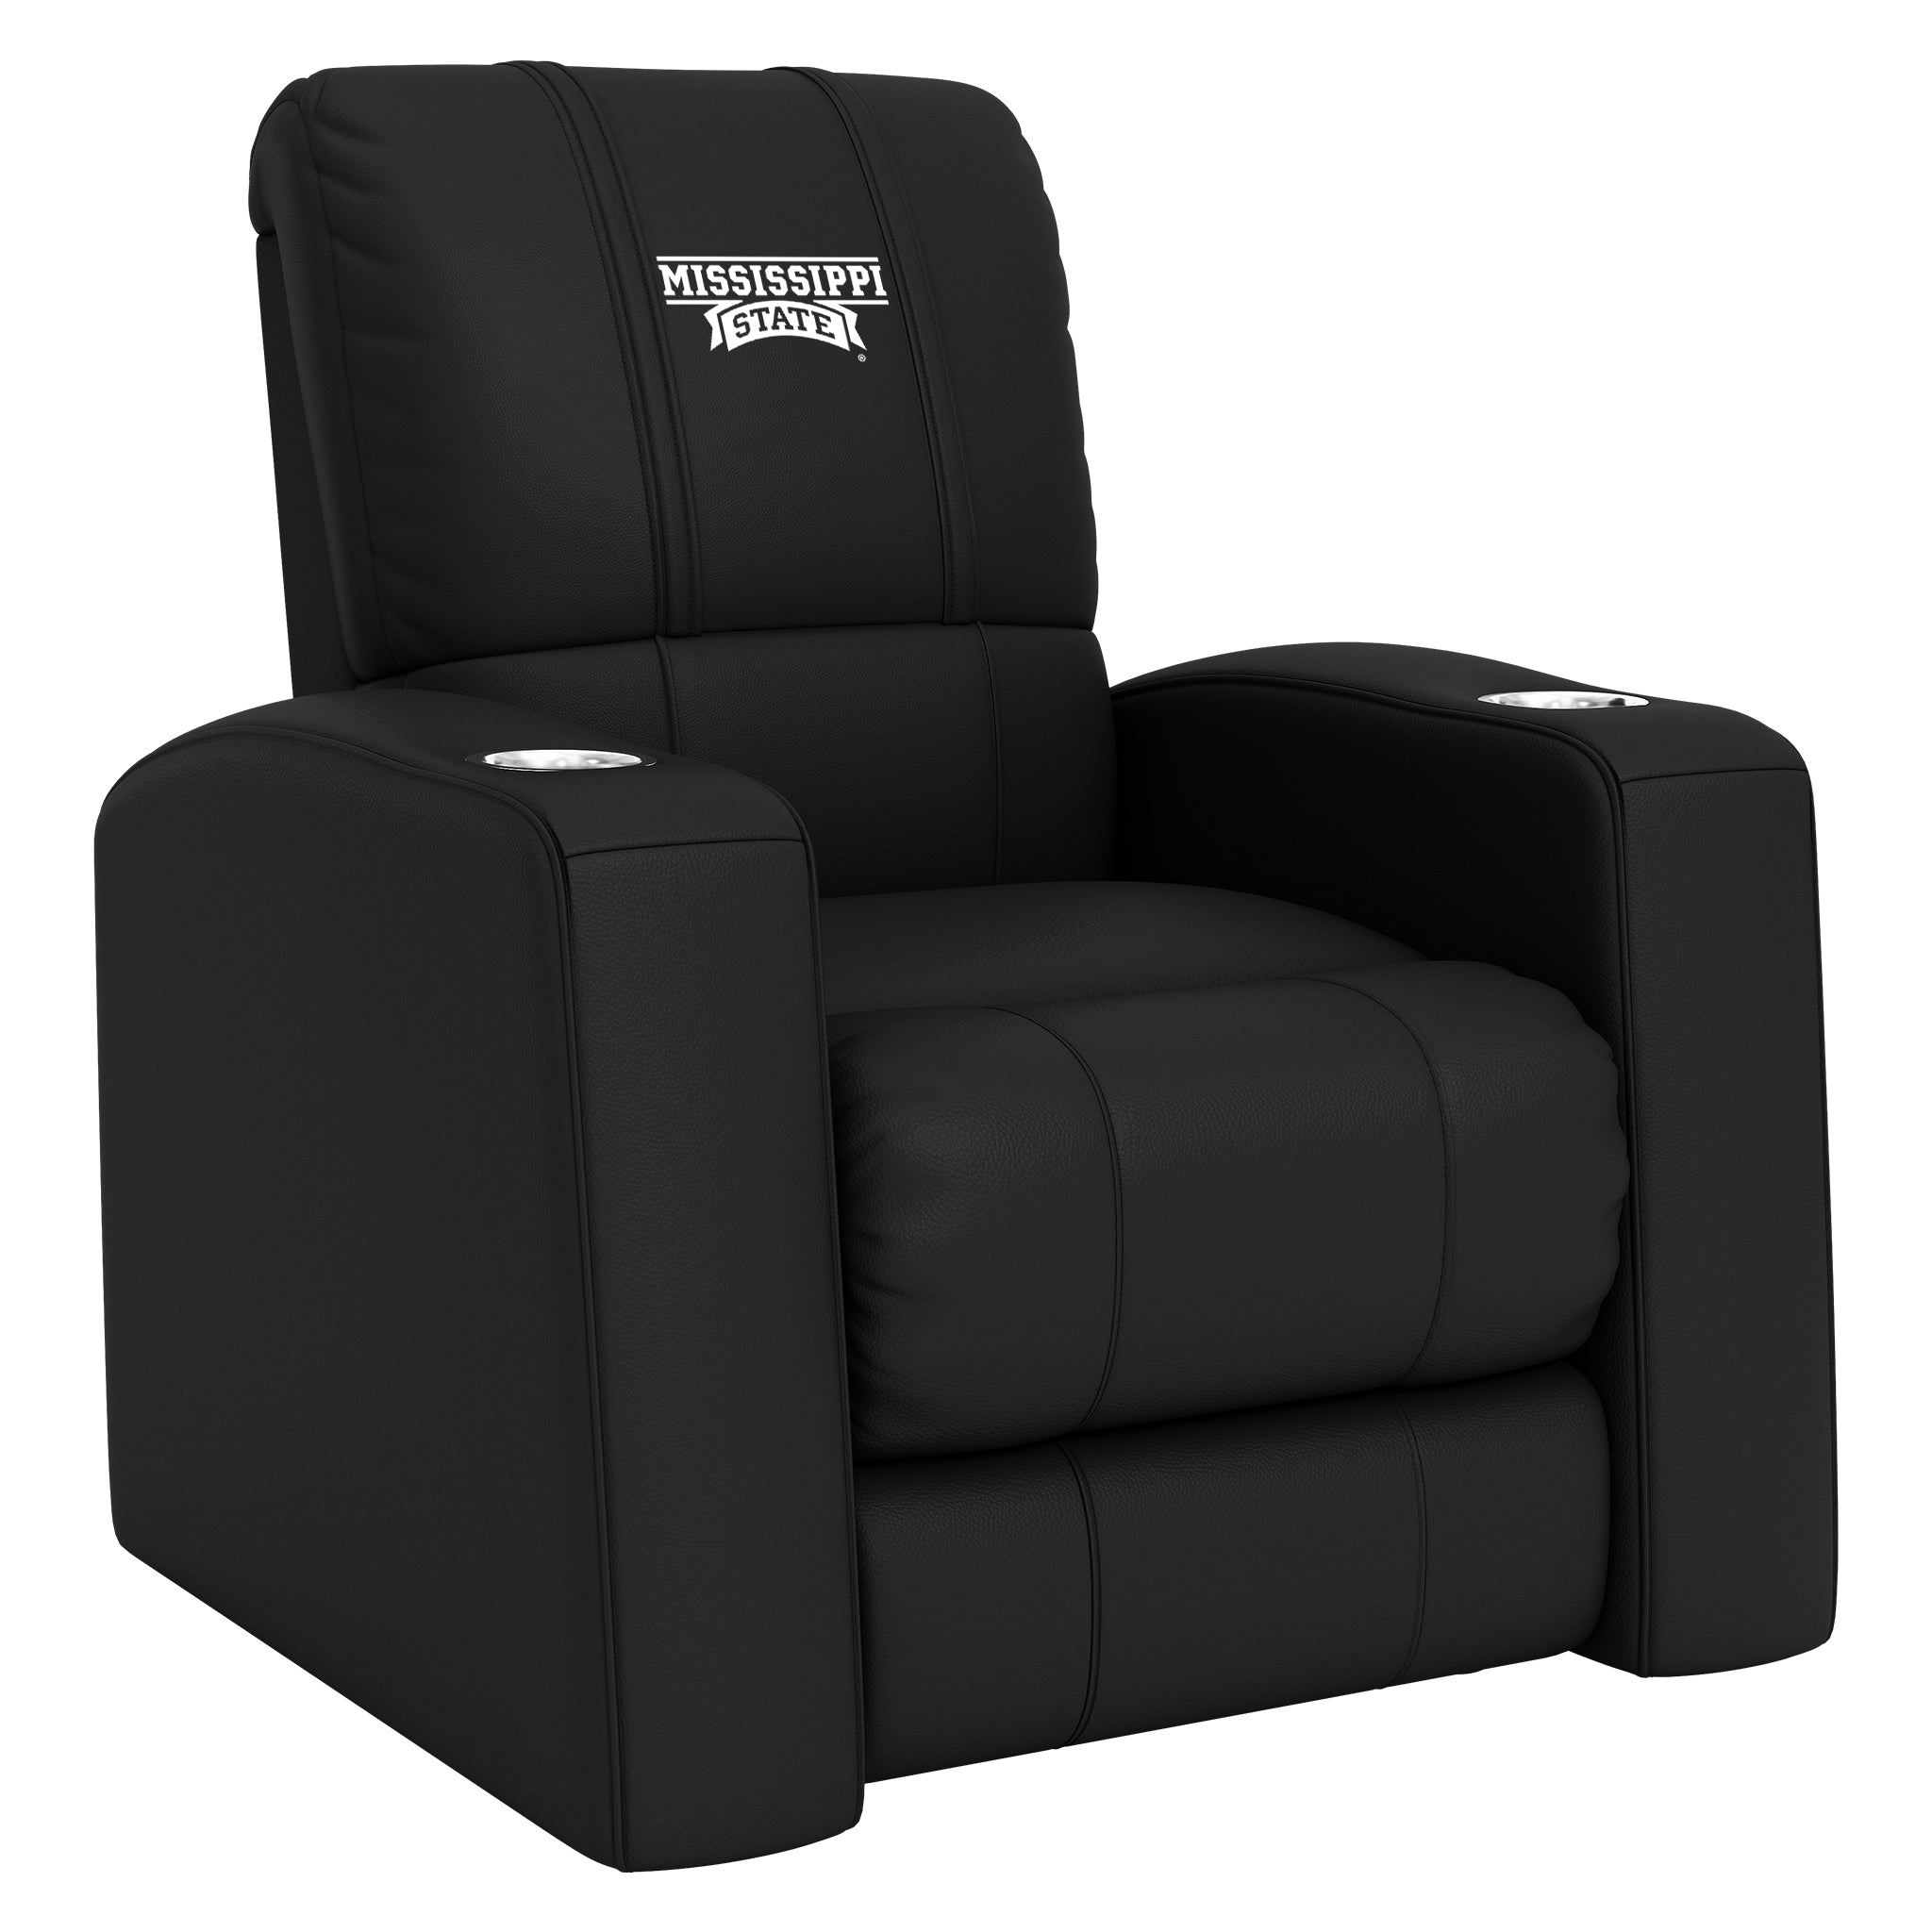 Mississippi State Home Theater Recliner with Mississippi State Alternate